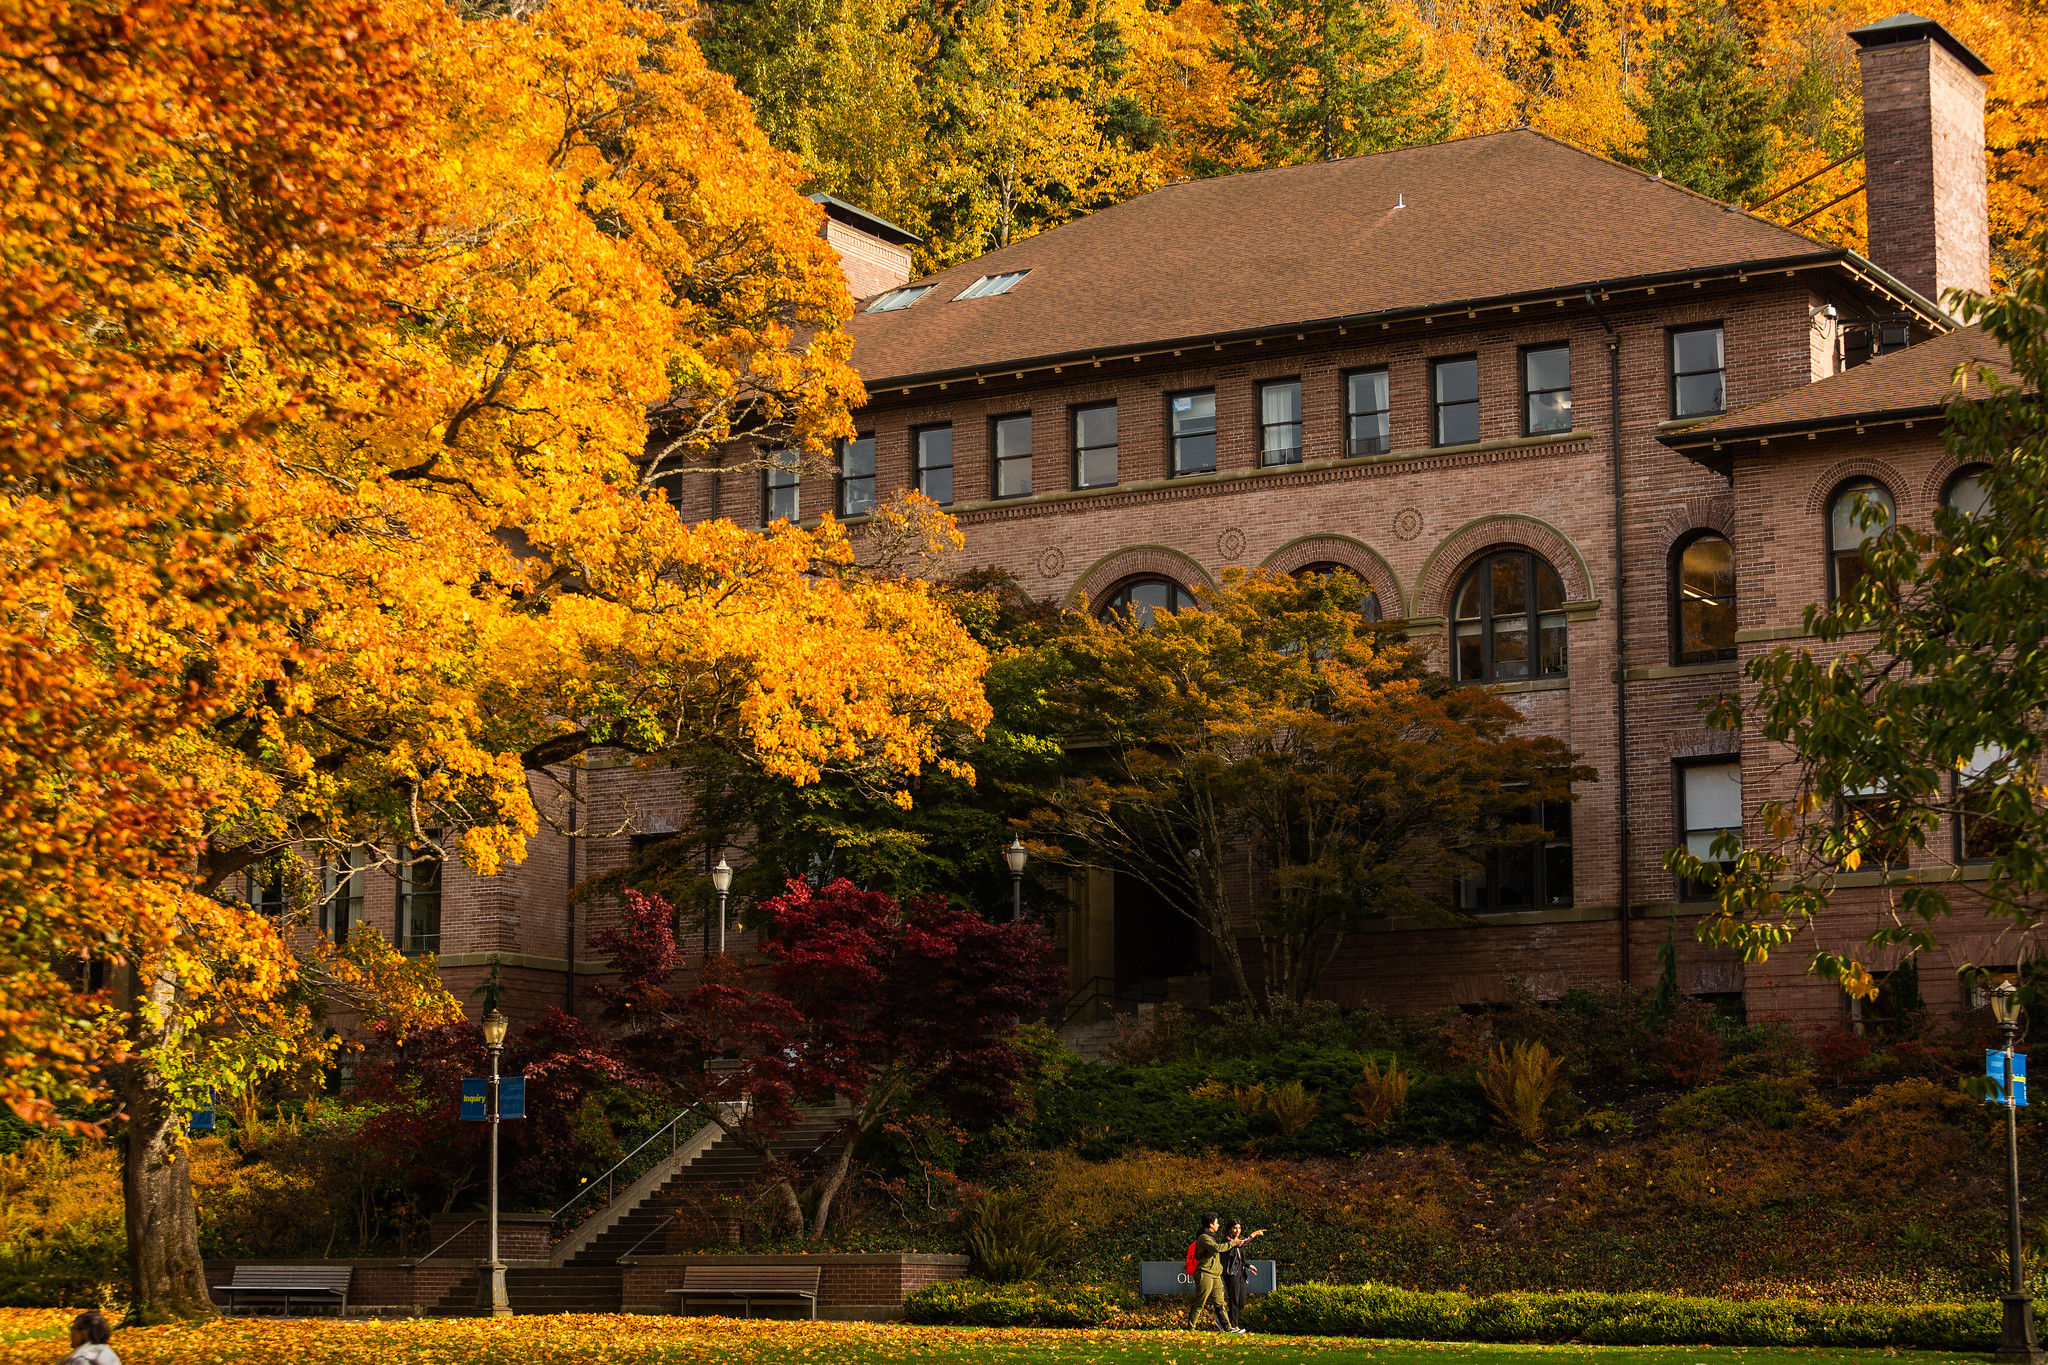 Old Main surrounded by fall foliage